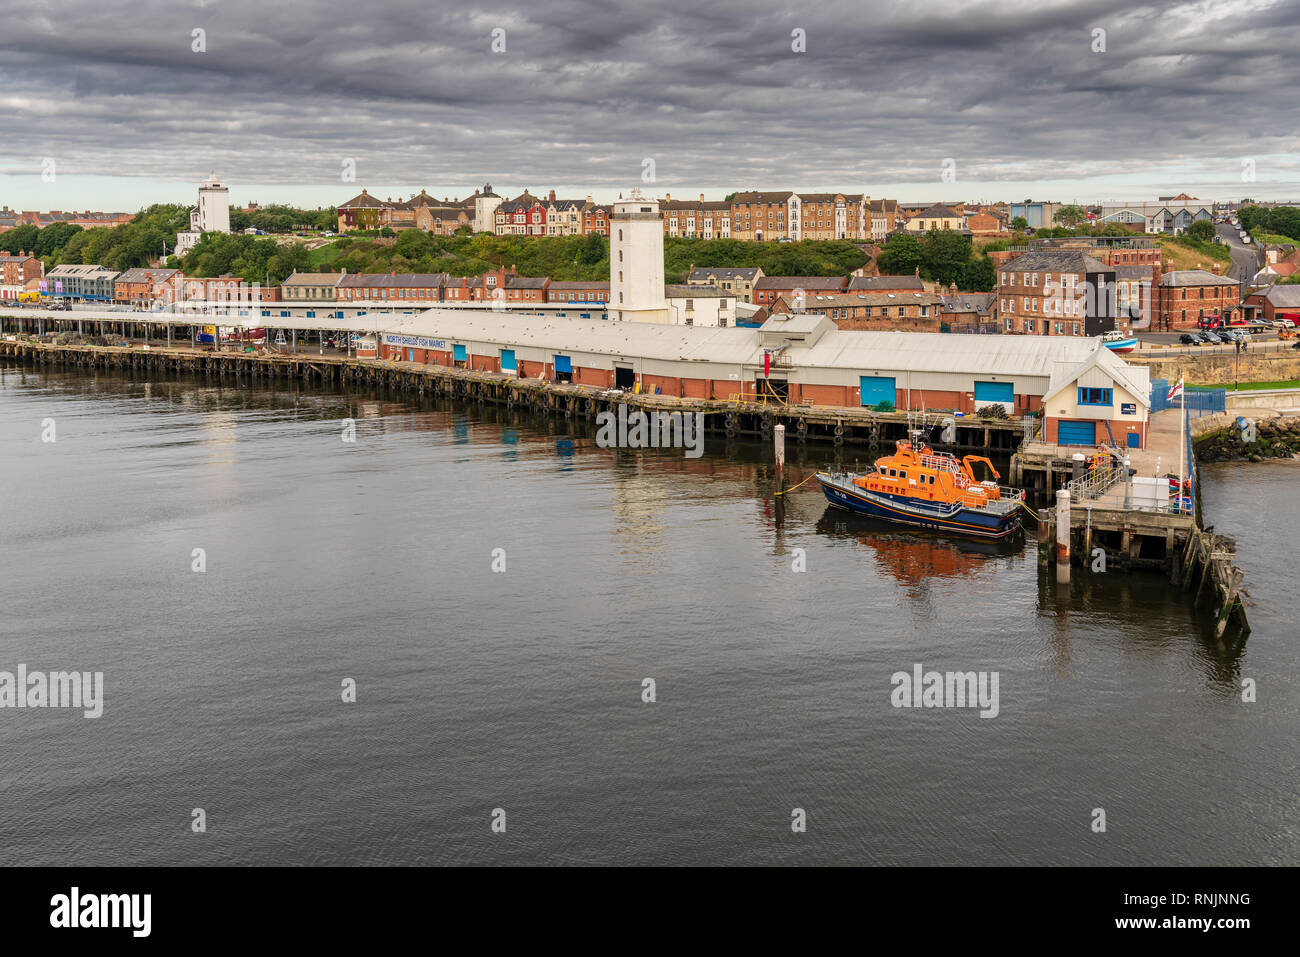 North Shields, Tyne and Wear, England, UK - September 05, 2018: View from the River Tyne at the North Shields Fish Market Stock Photo